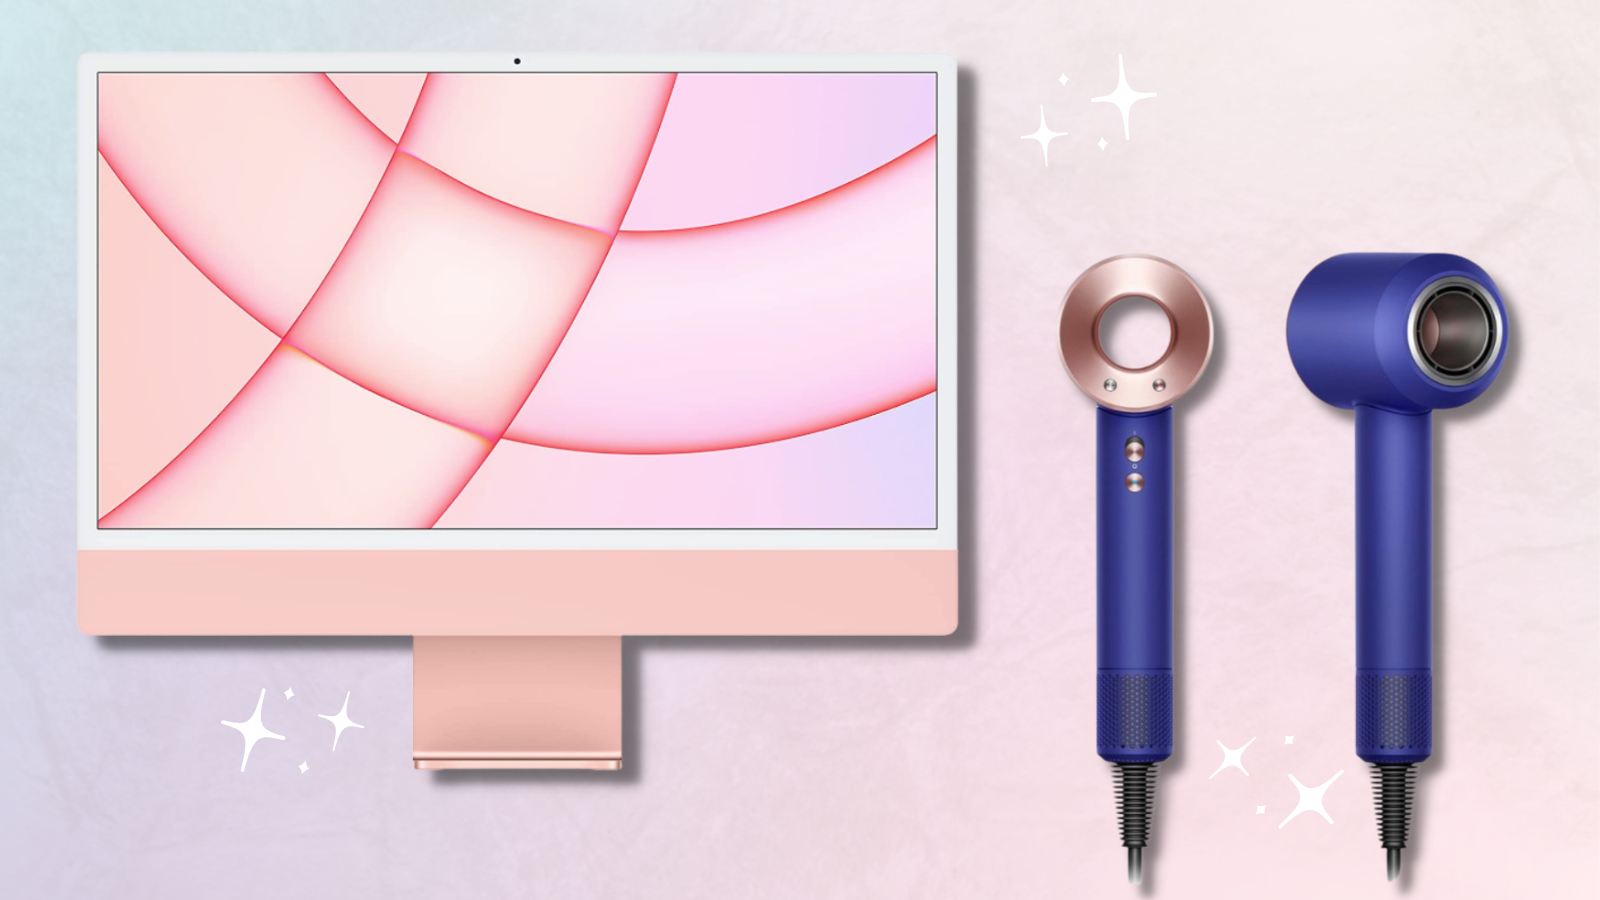 24-inch imac in pink and dyson supersonic hair dryer in blue